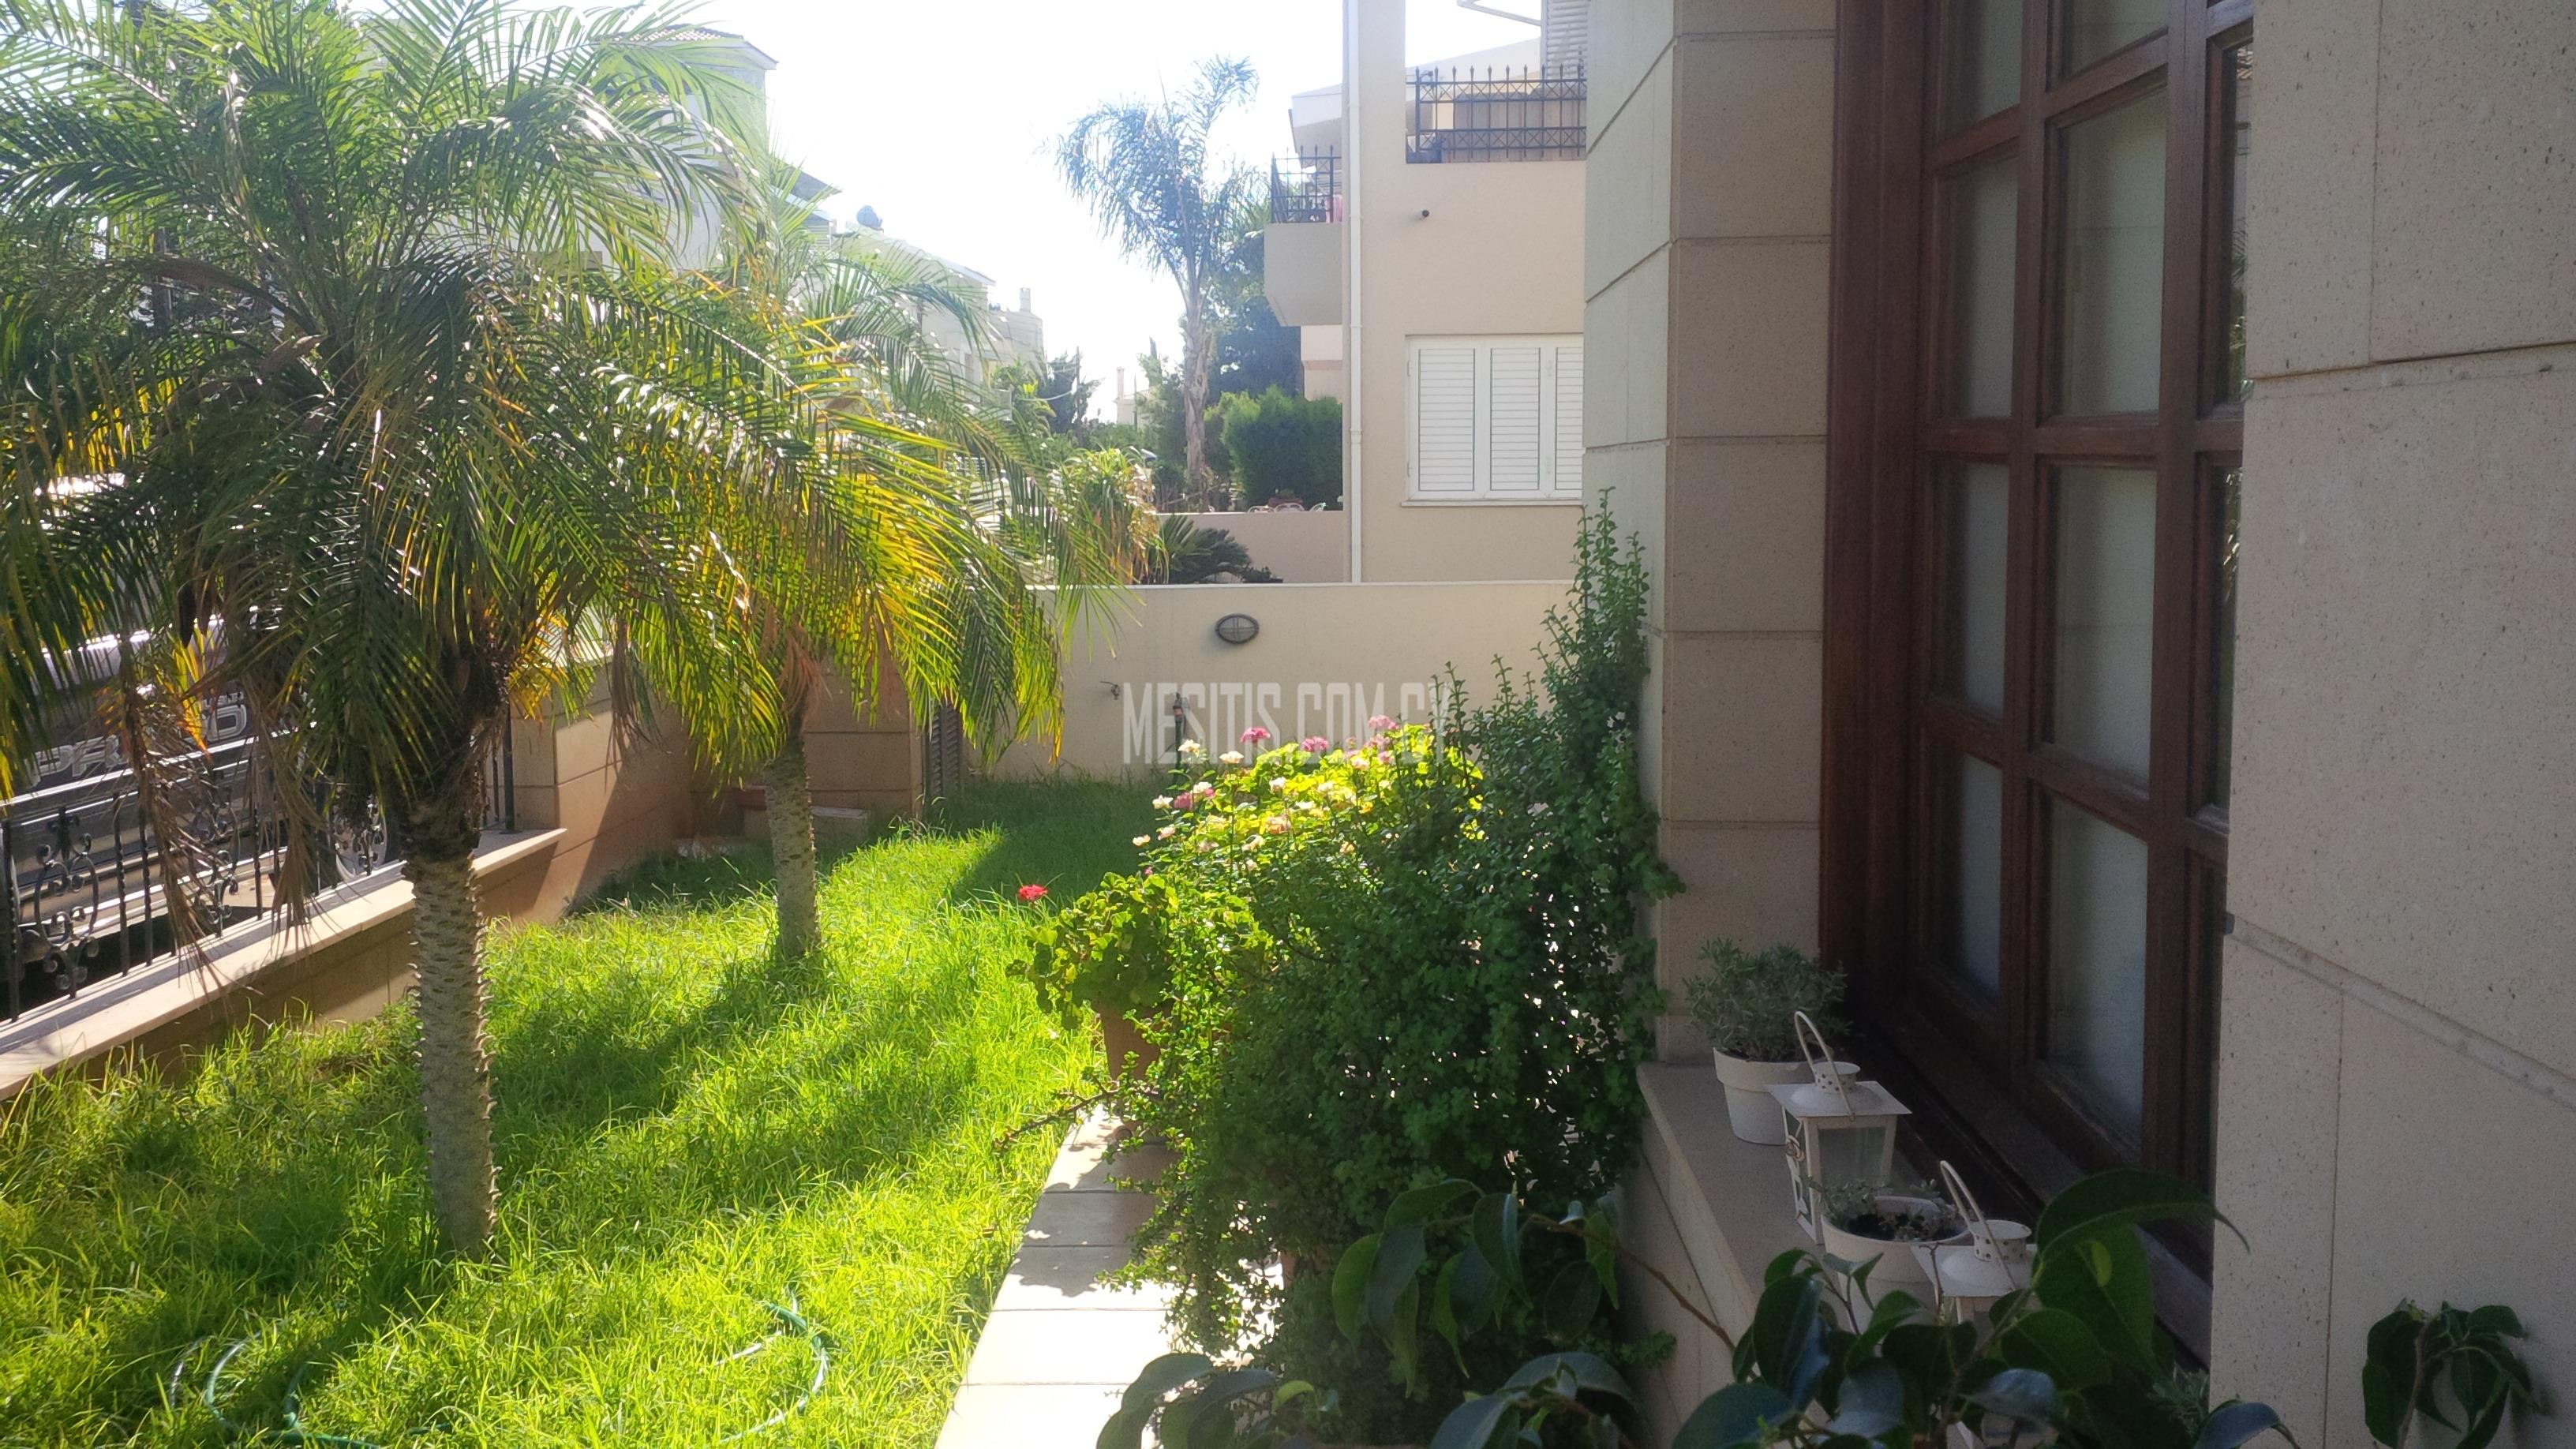 4 Bedroom Luxury House For Rent Or For Sale In Aglantzia With Attic Separate Office Room And Big Yard #1378-23